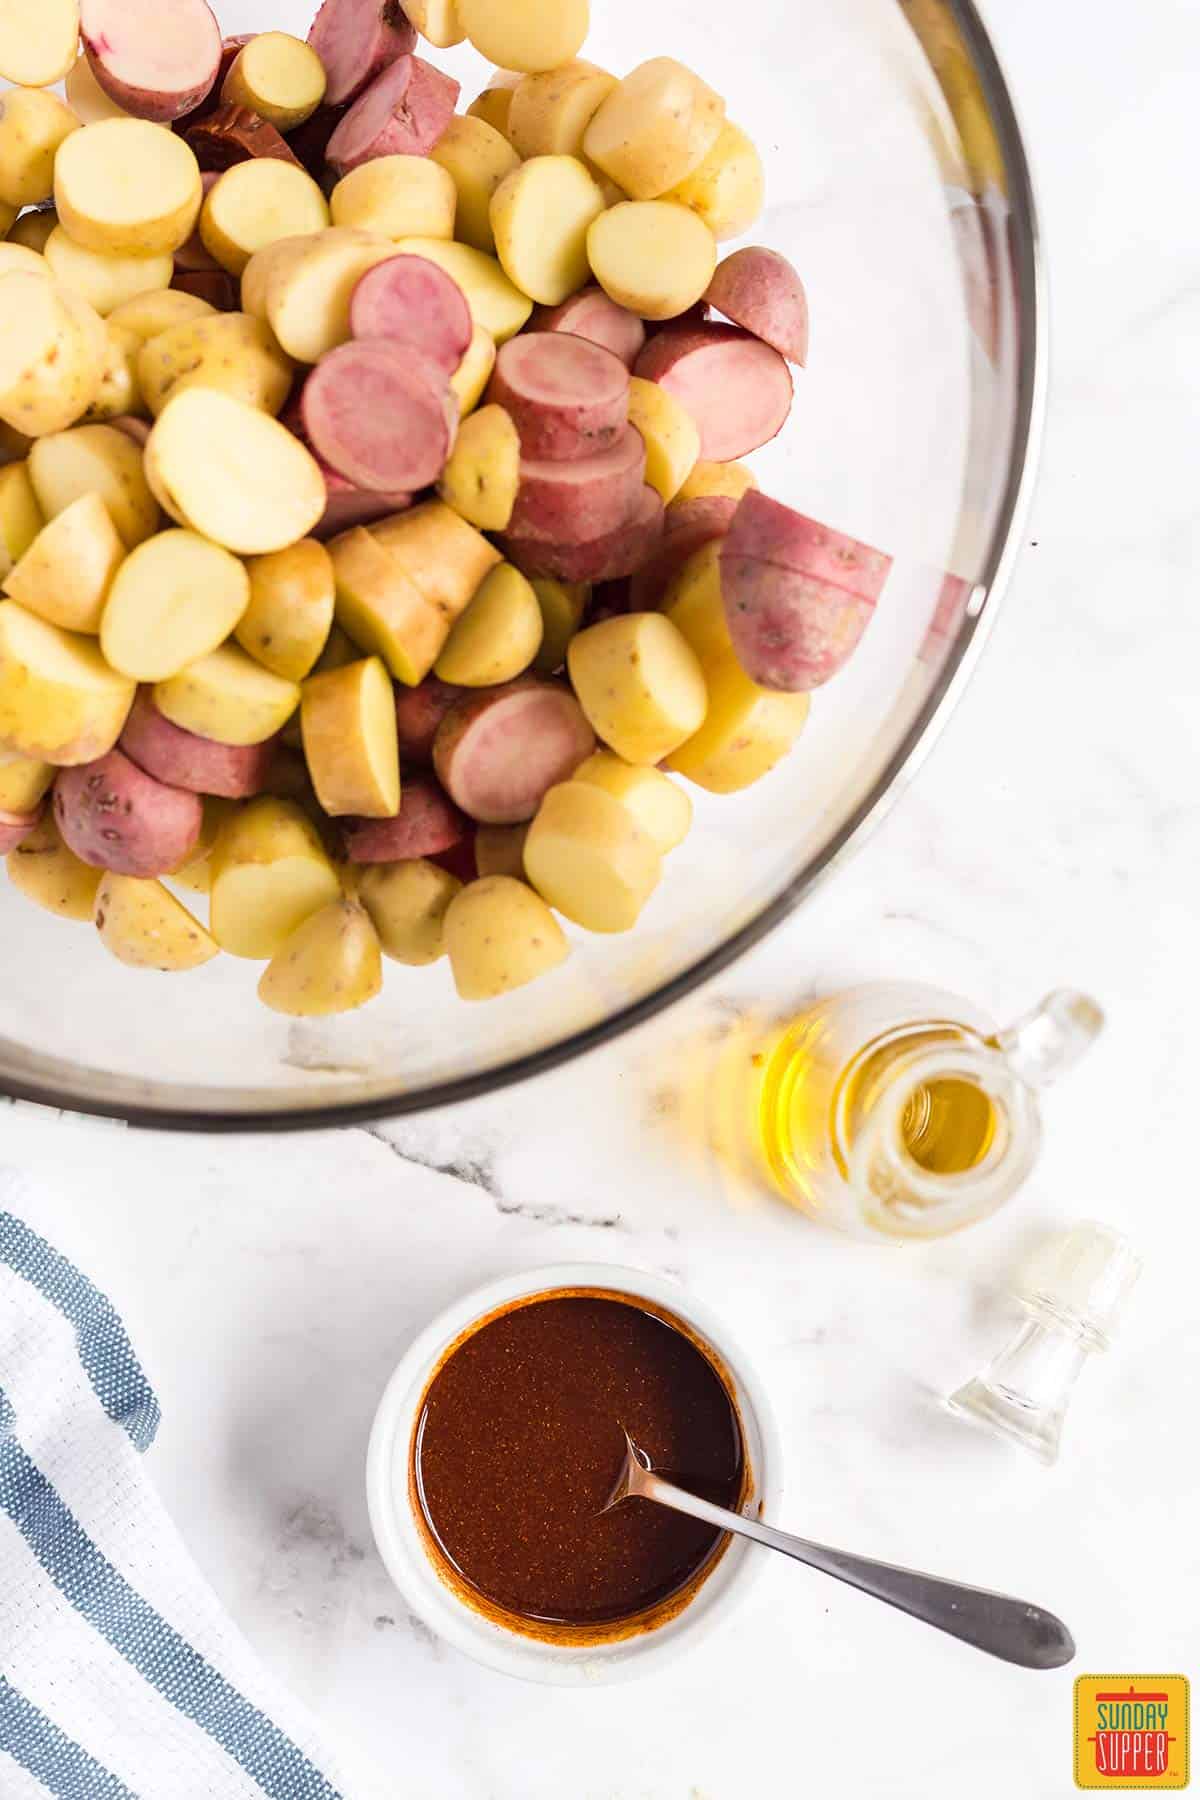 Bowl of sauce mix with a spoon in it next to fingerling potatoes in a glass bowl